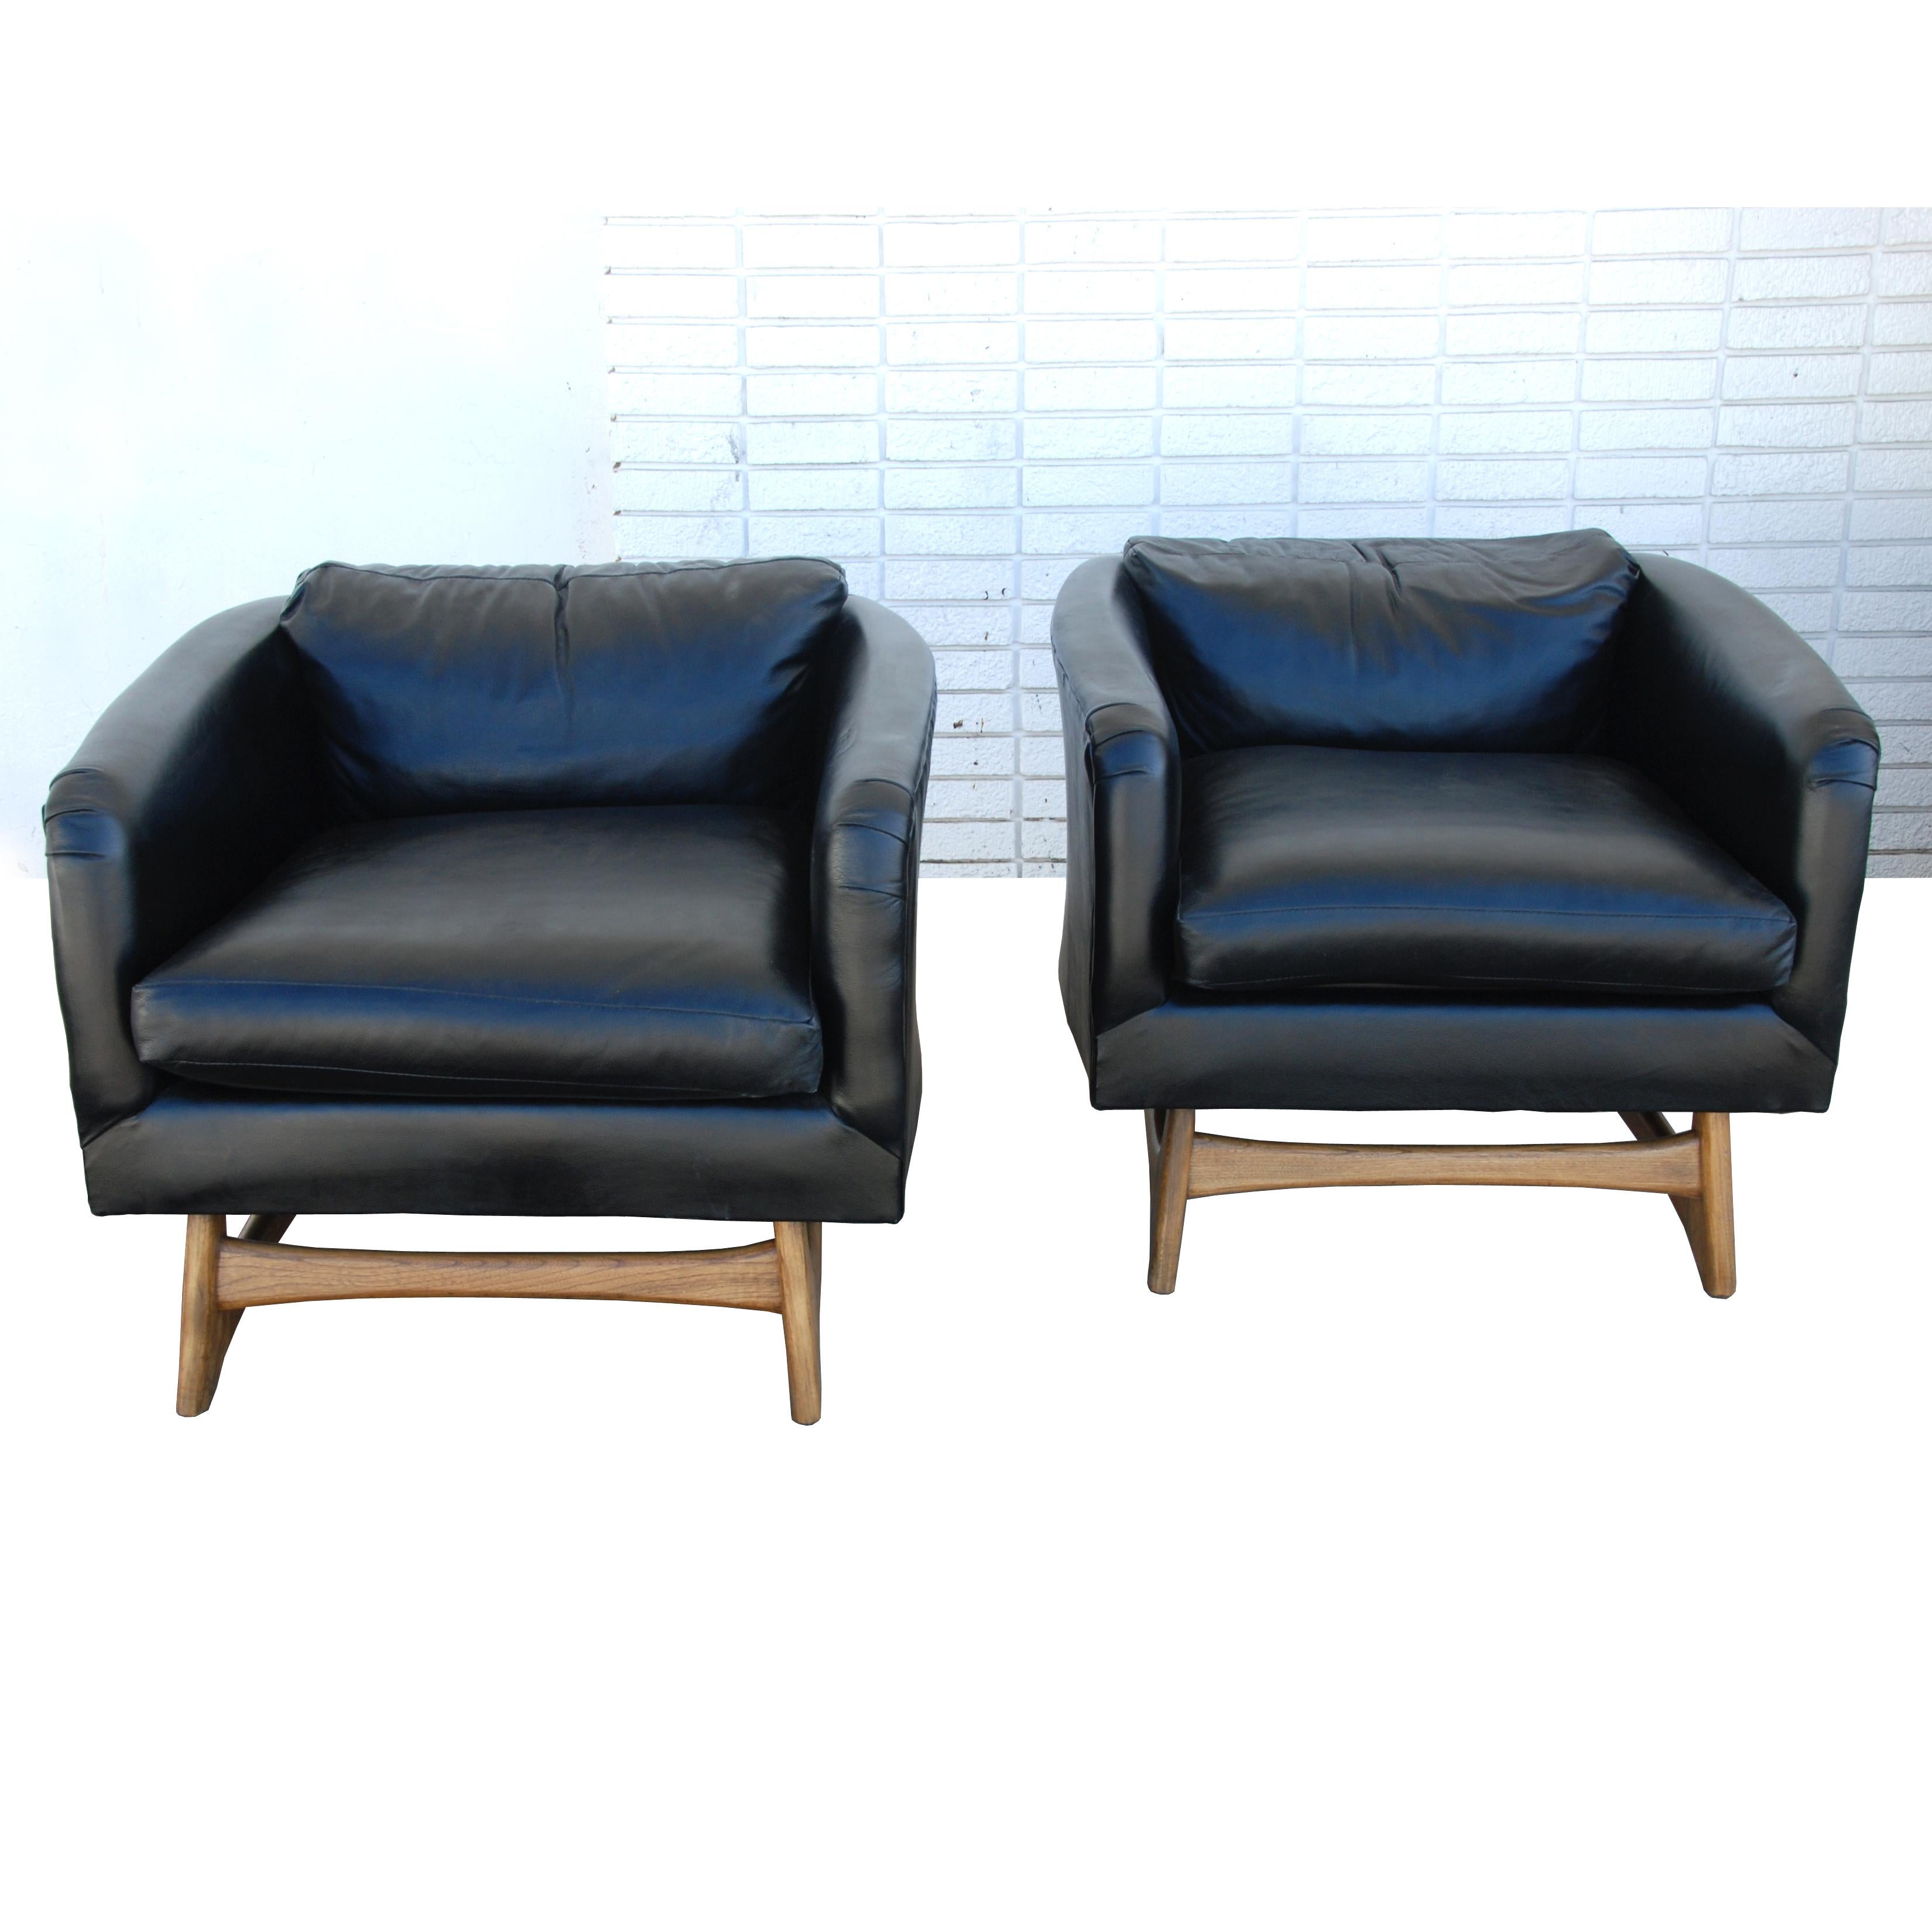 Pair of Adrian Pearsall for Craft Associates Lounge Chairs In Good Condition For Sale In Pasadena, TX